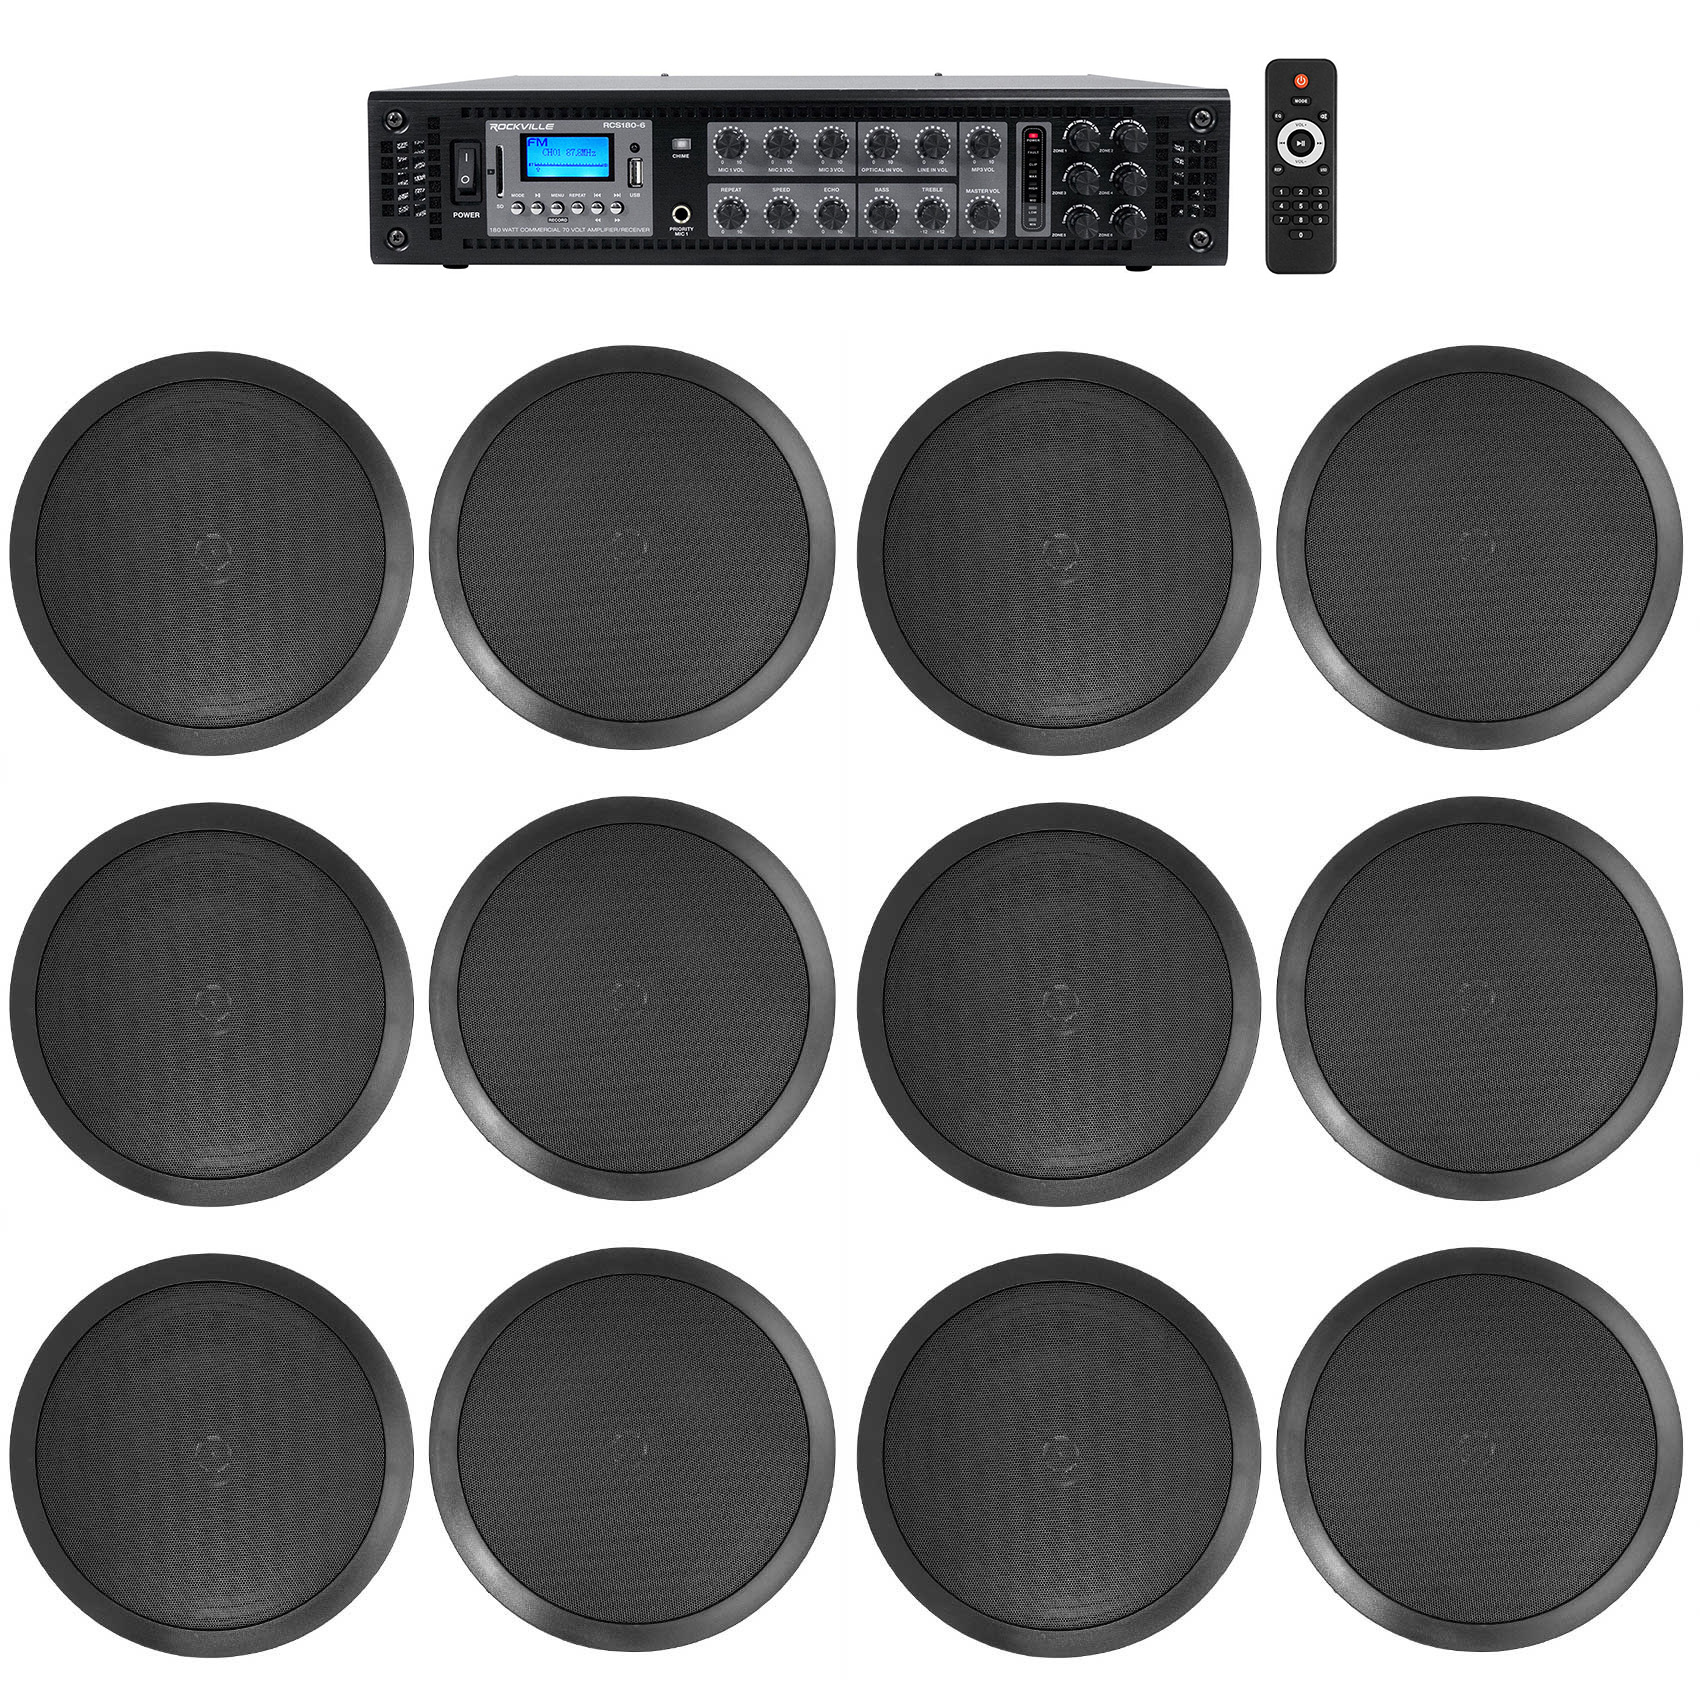 Rockville Commercial Receiver+(12) 8" 2Way Black Ceiling Speakers 4 Hotel/Office - image 1 of 5